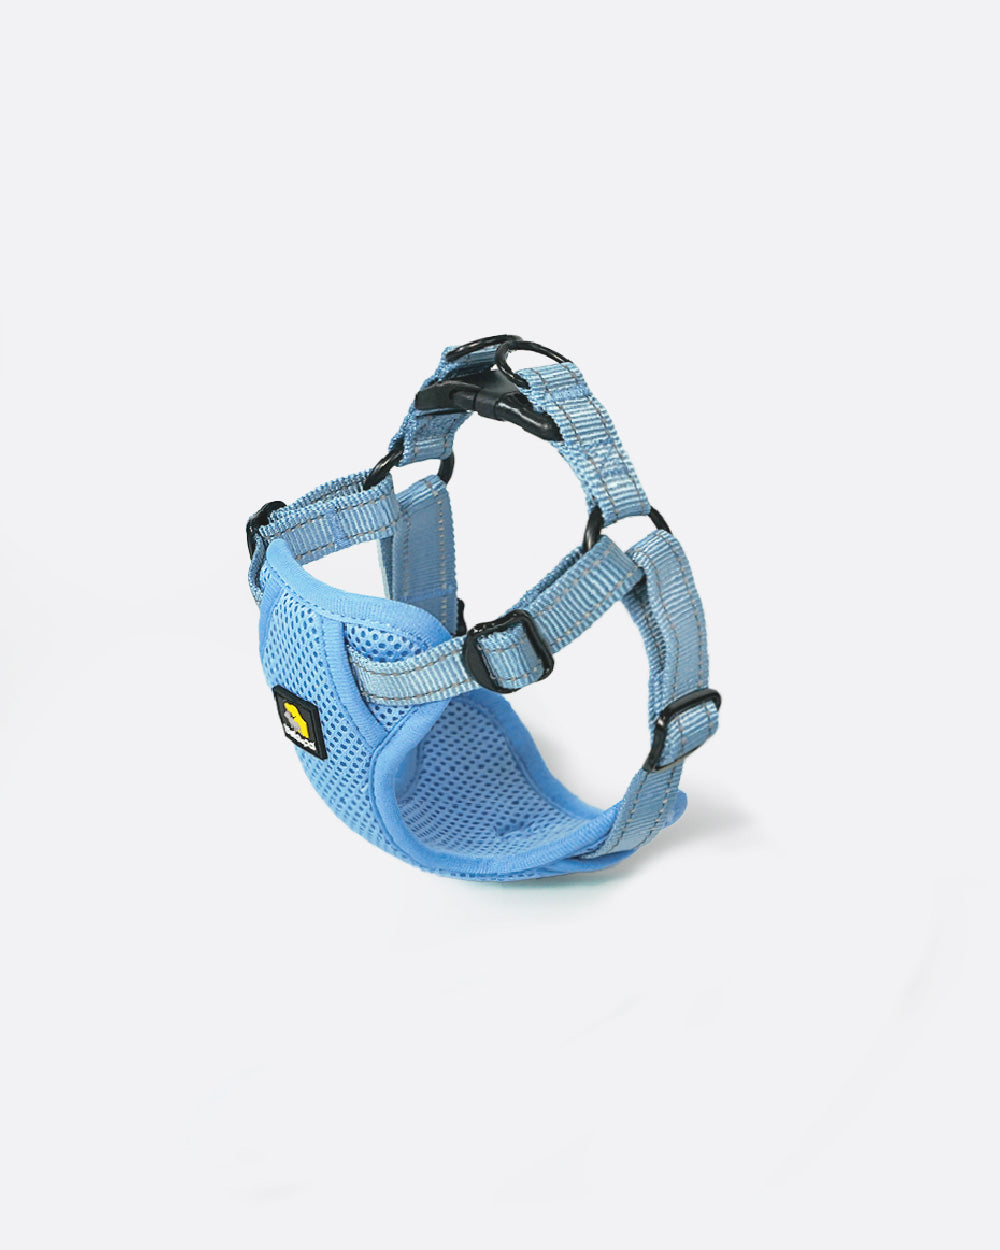 OxyMesh Flexi Step-in Harness - Sky Blue